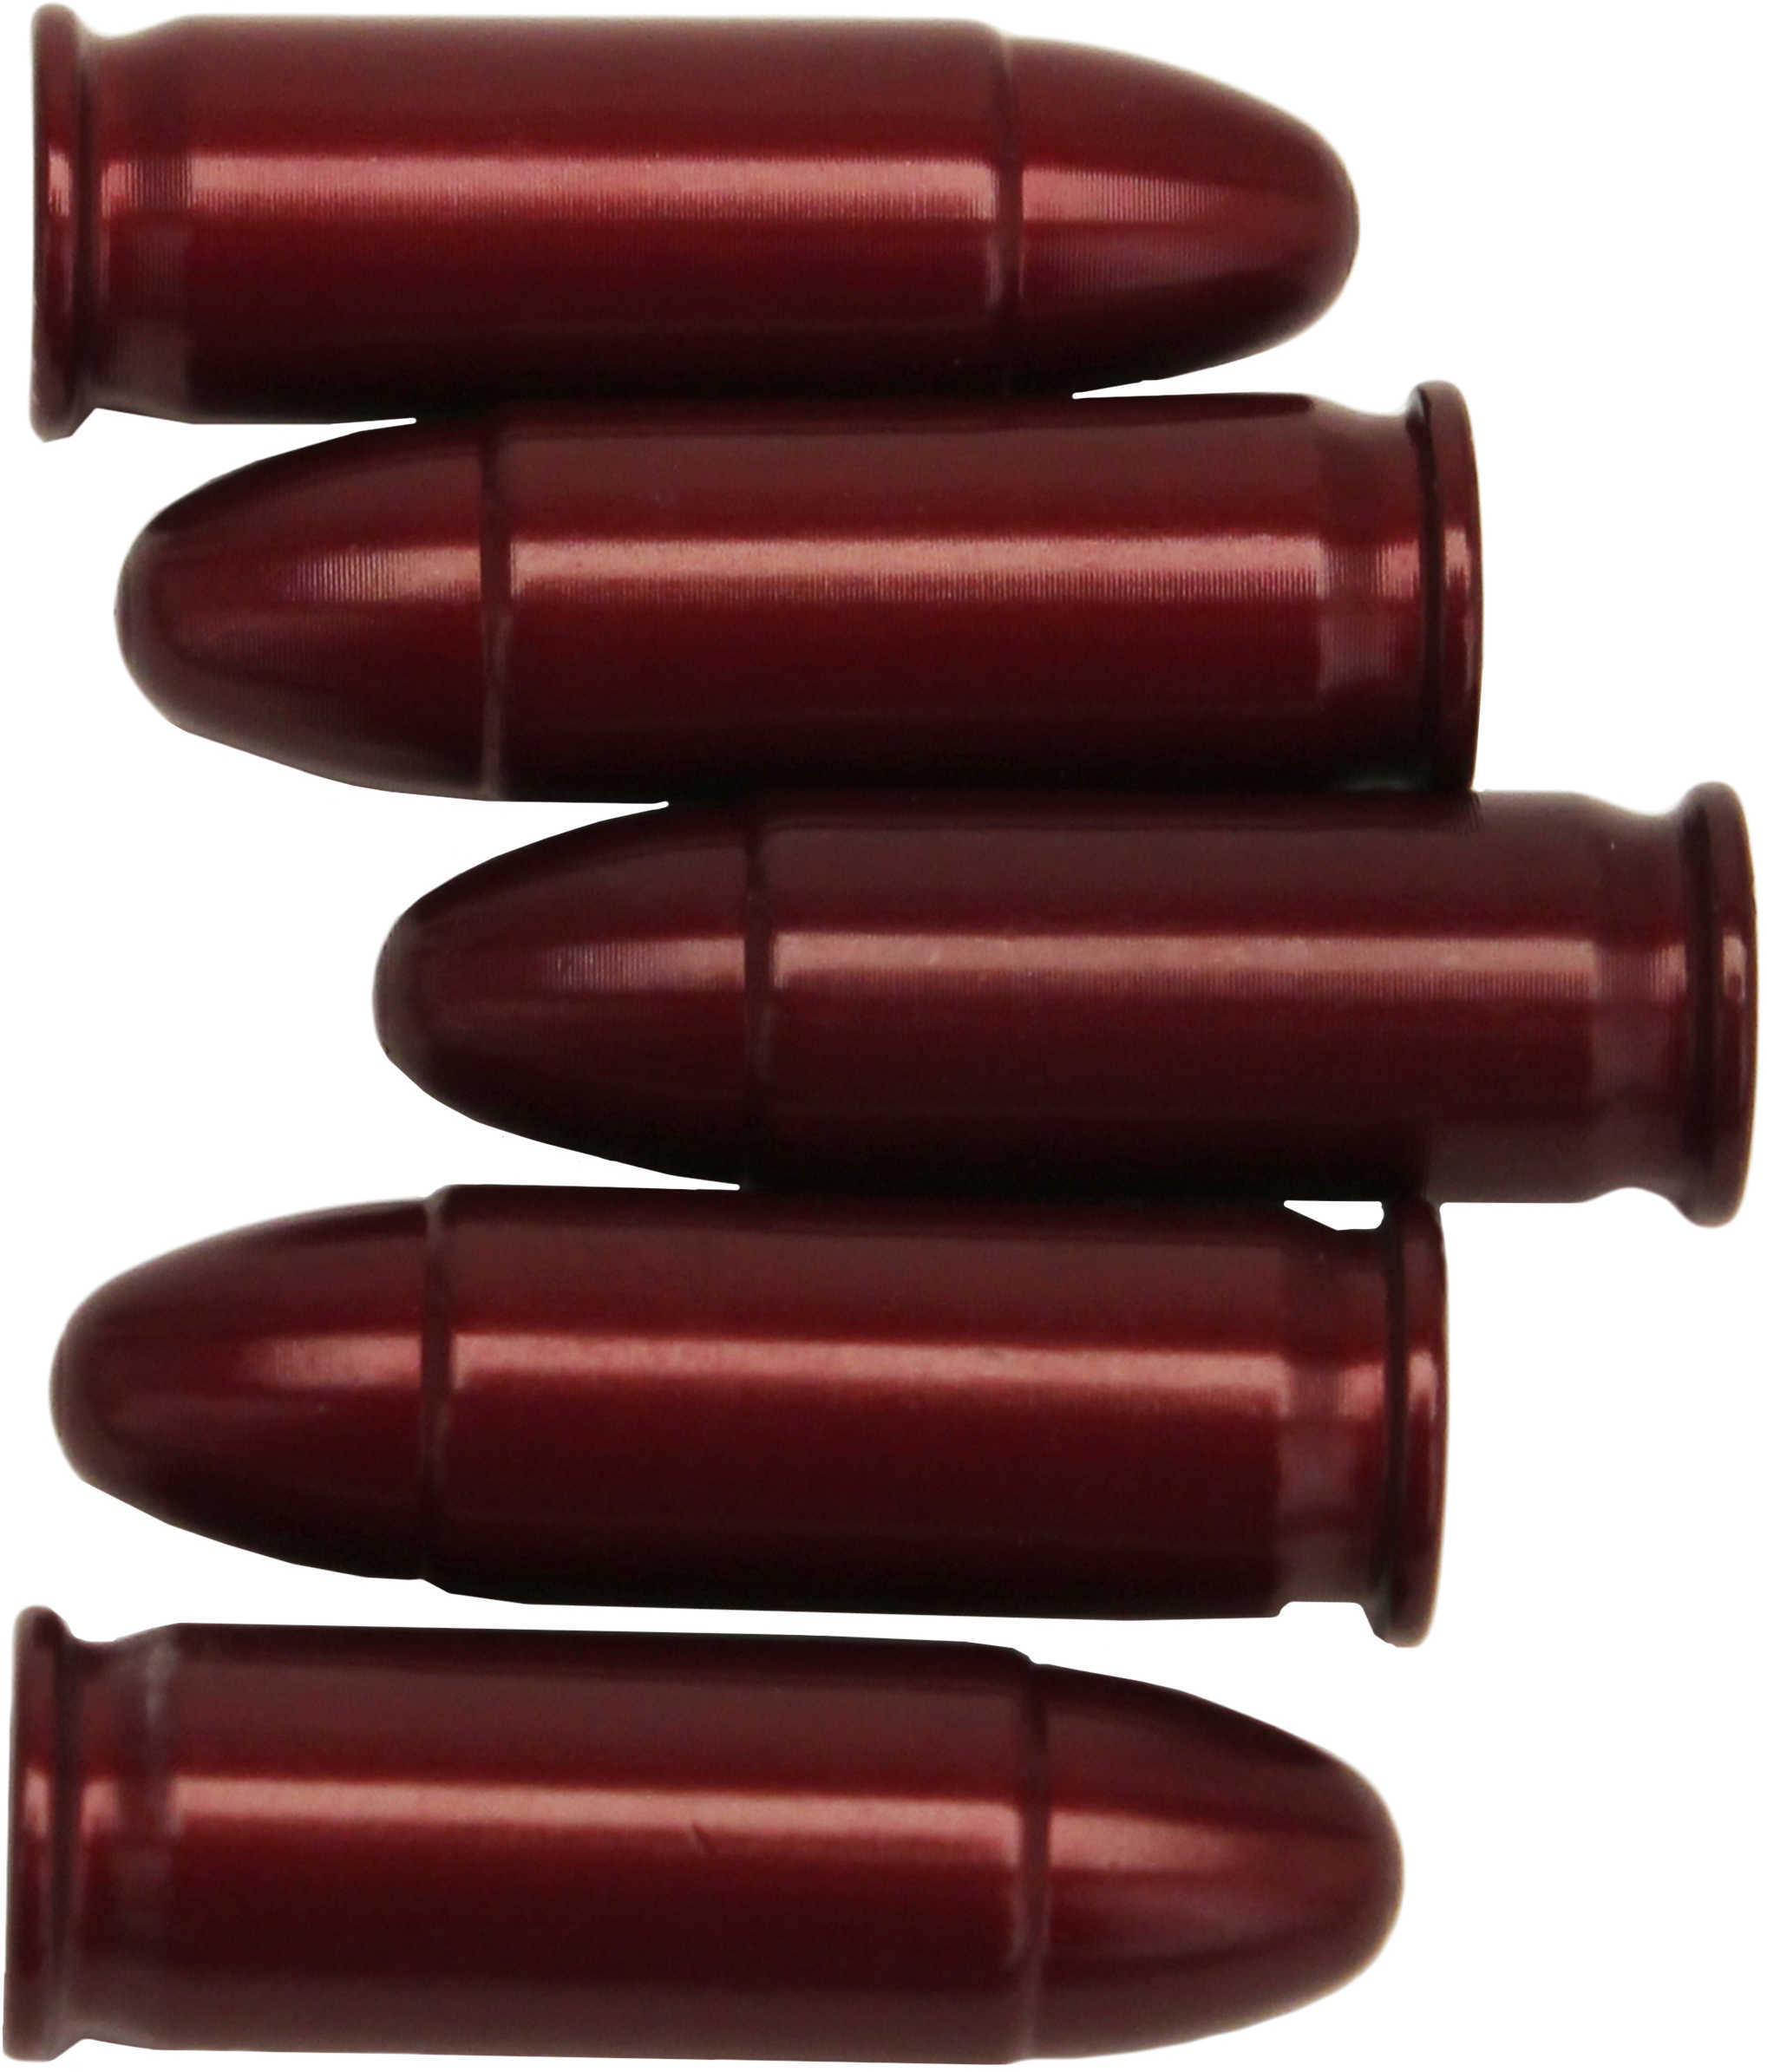 A-Zoom Precision Metal Snap Caps 38 Super, 5 Per Pack For Safety Training, Function Testing Or safely decocking Without